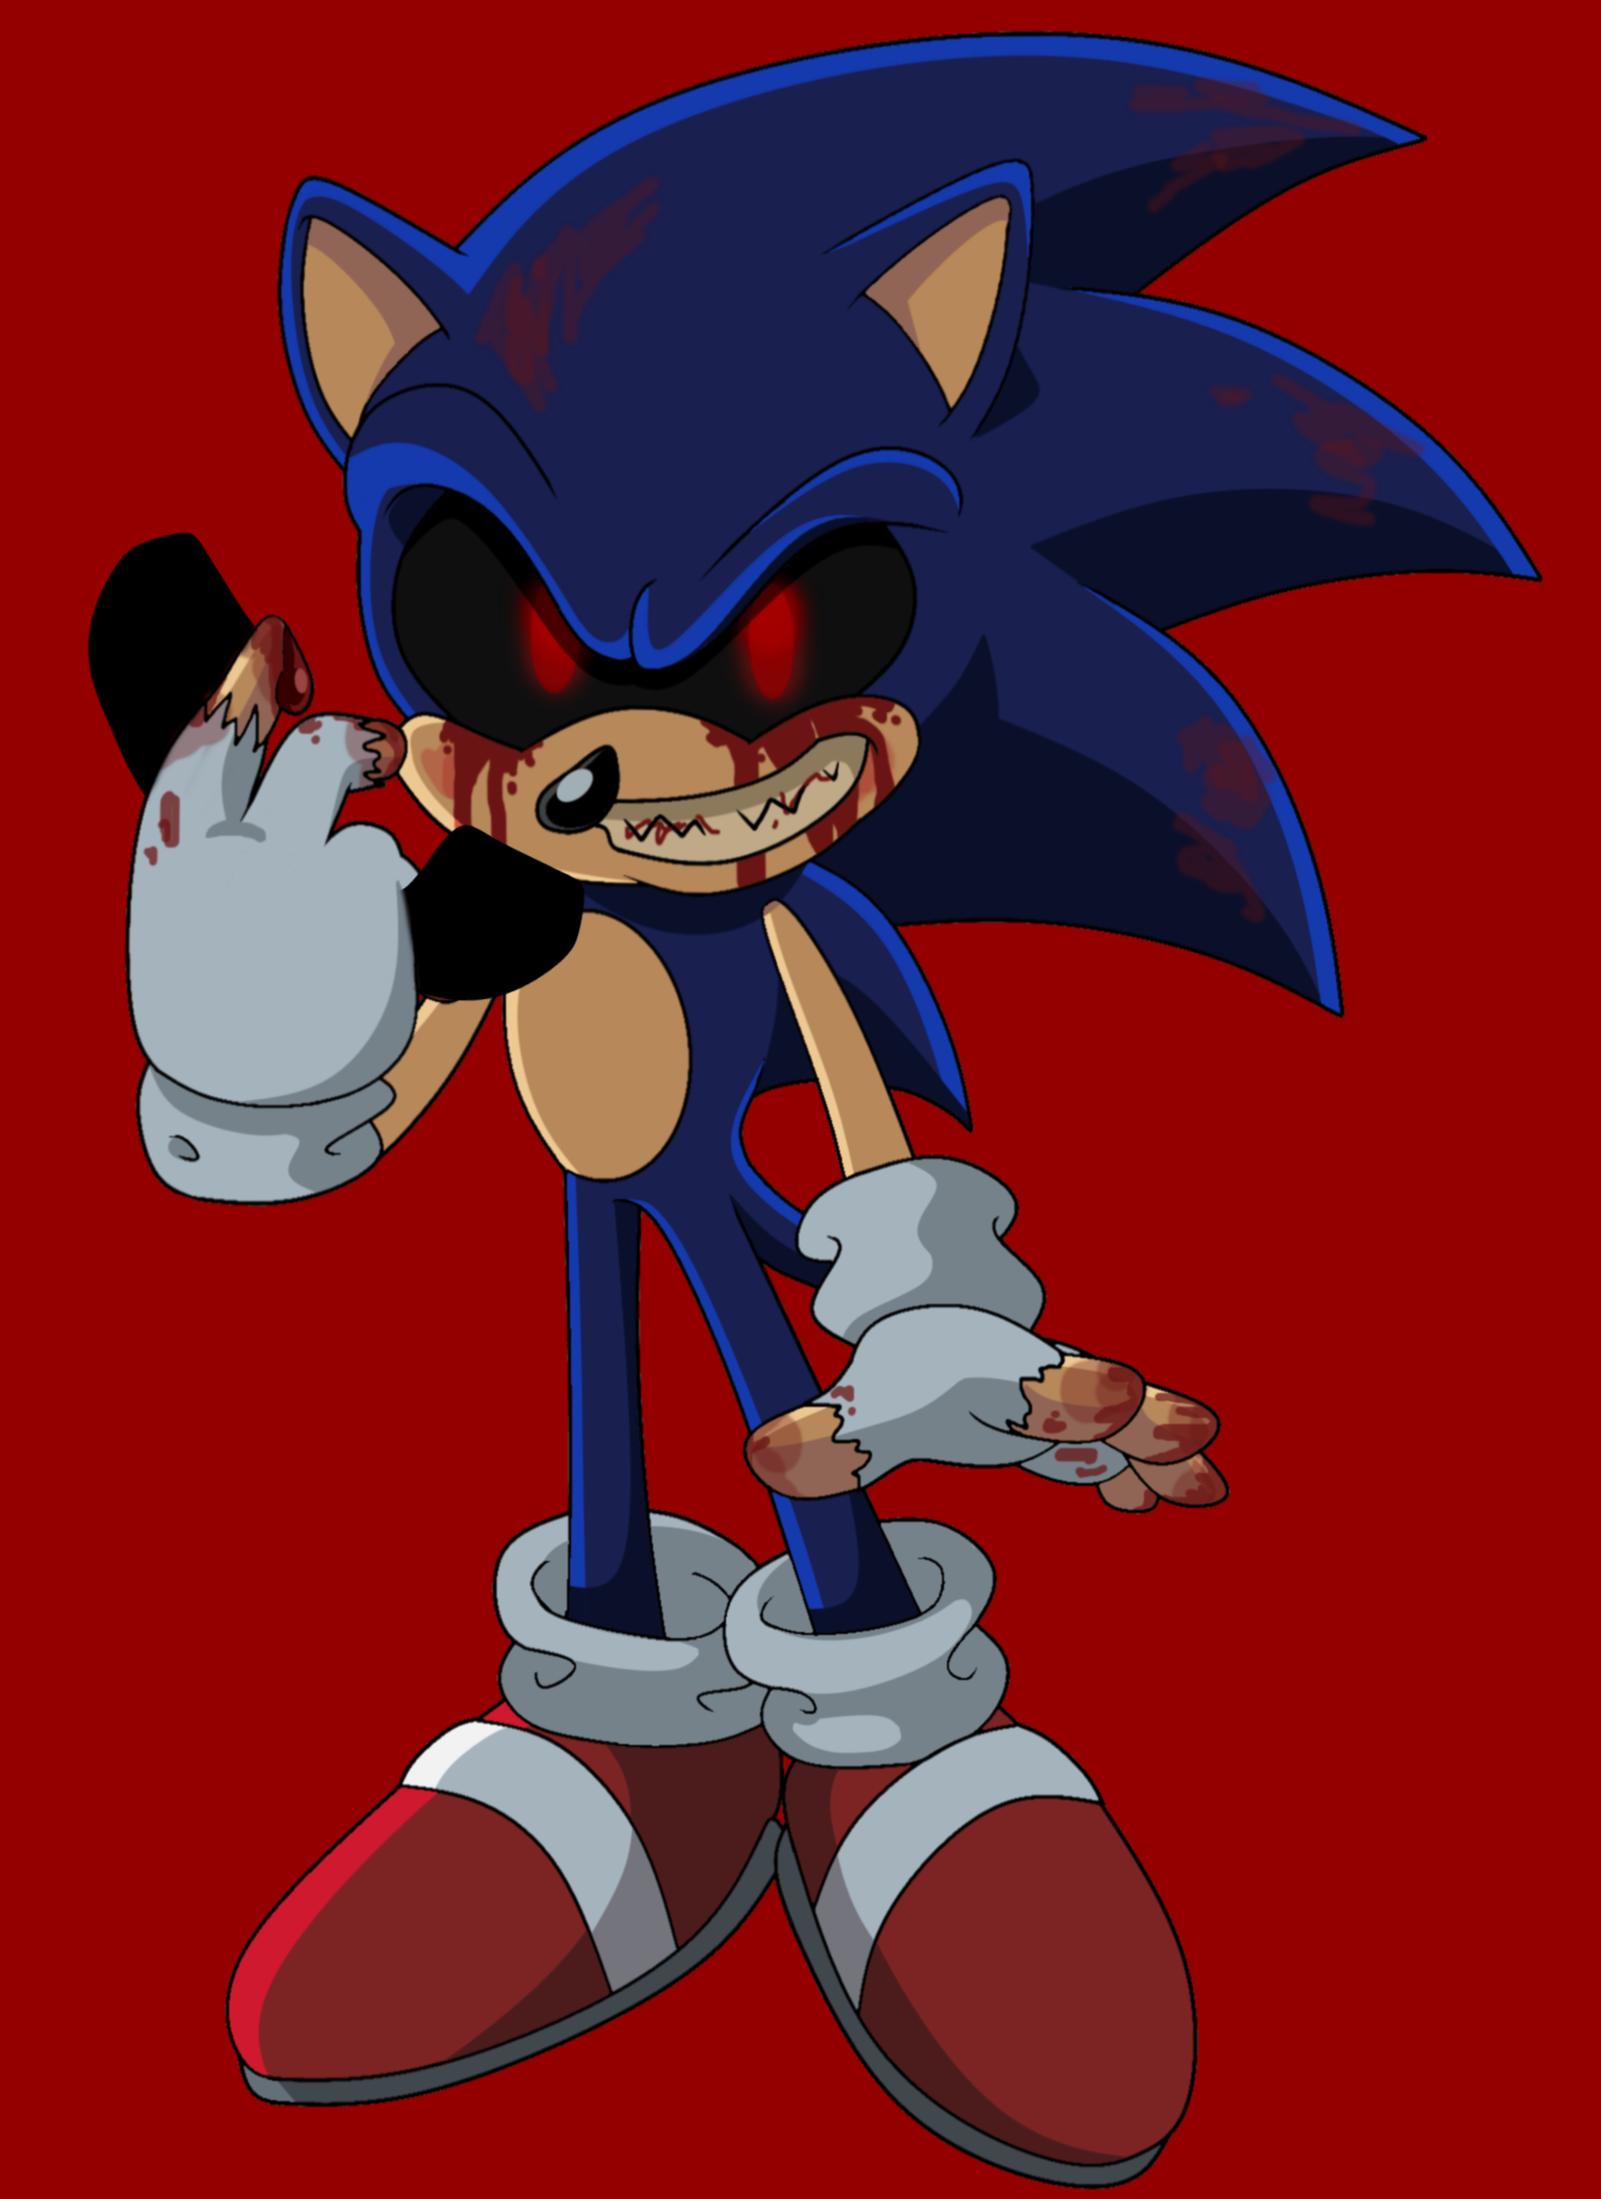 sonic wallpaper android,animated cartoon,cartoon,sonic the hedgehog,fictional character,animation